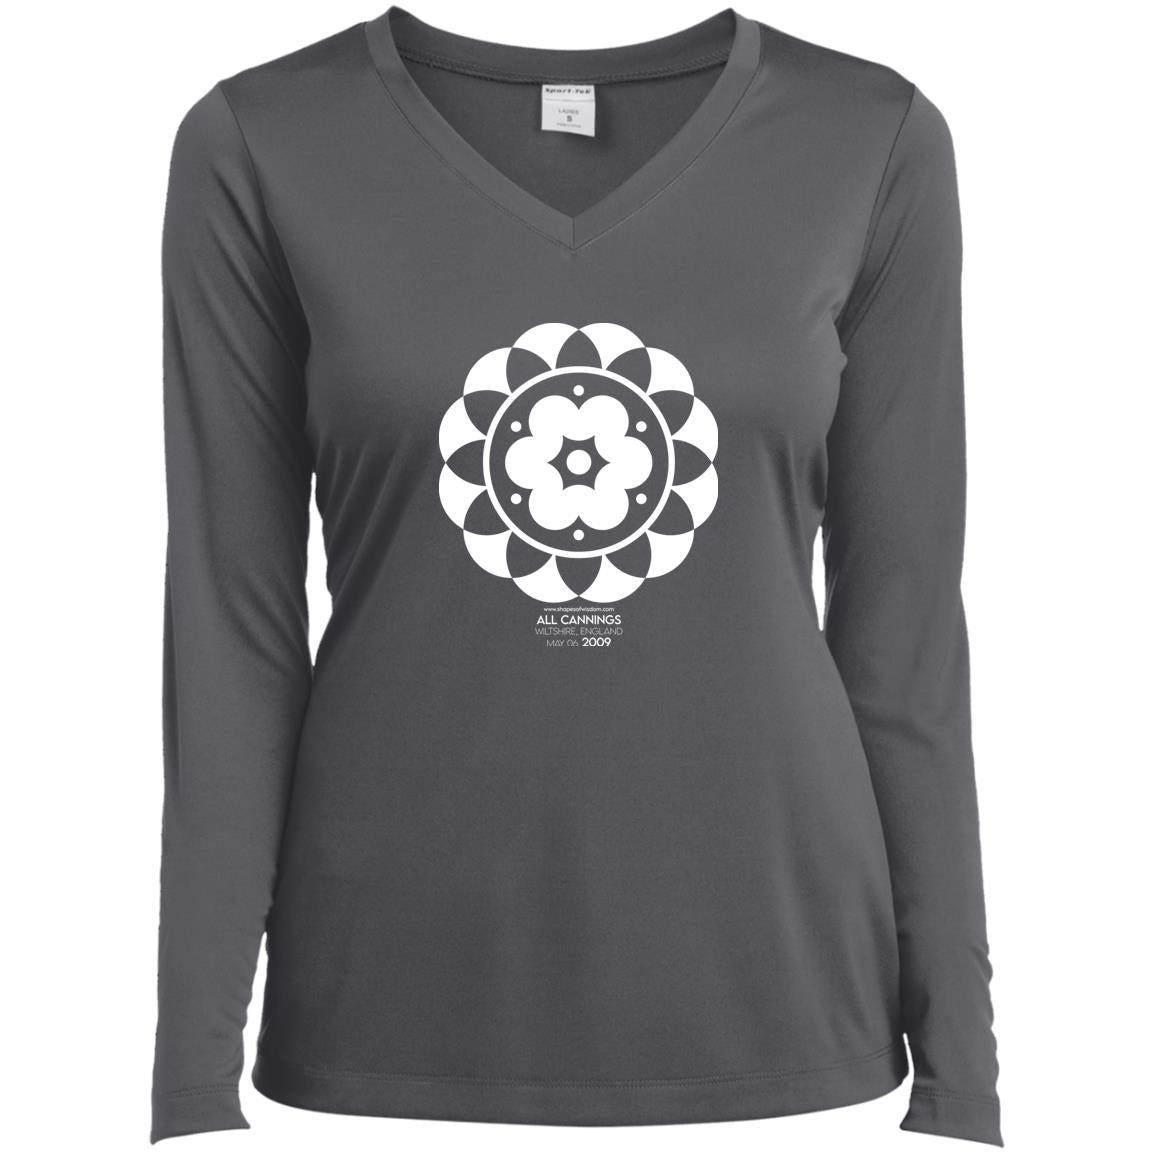 Crop Circle V-Neck Tee - All Cannings 3